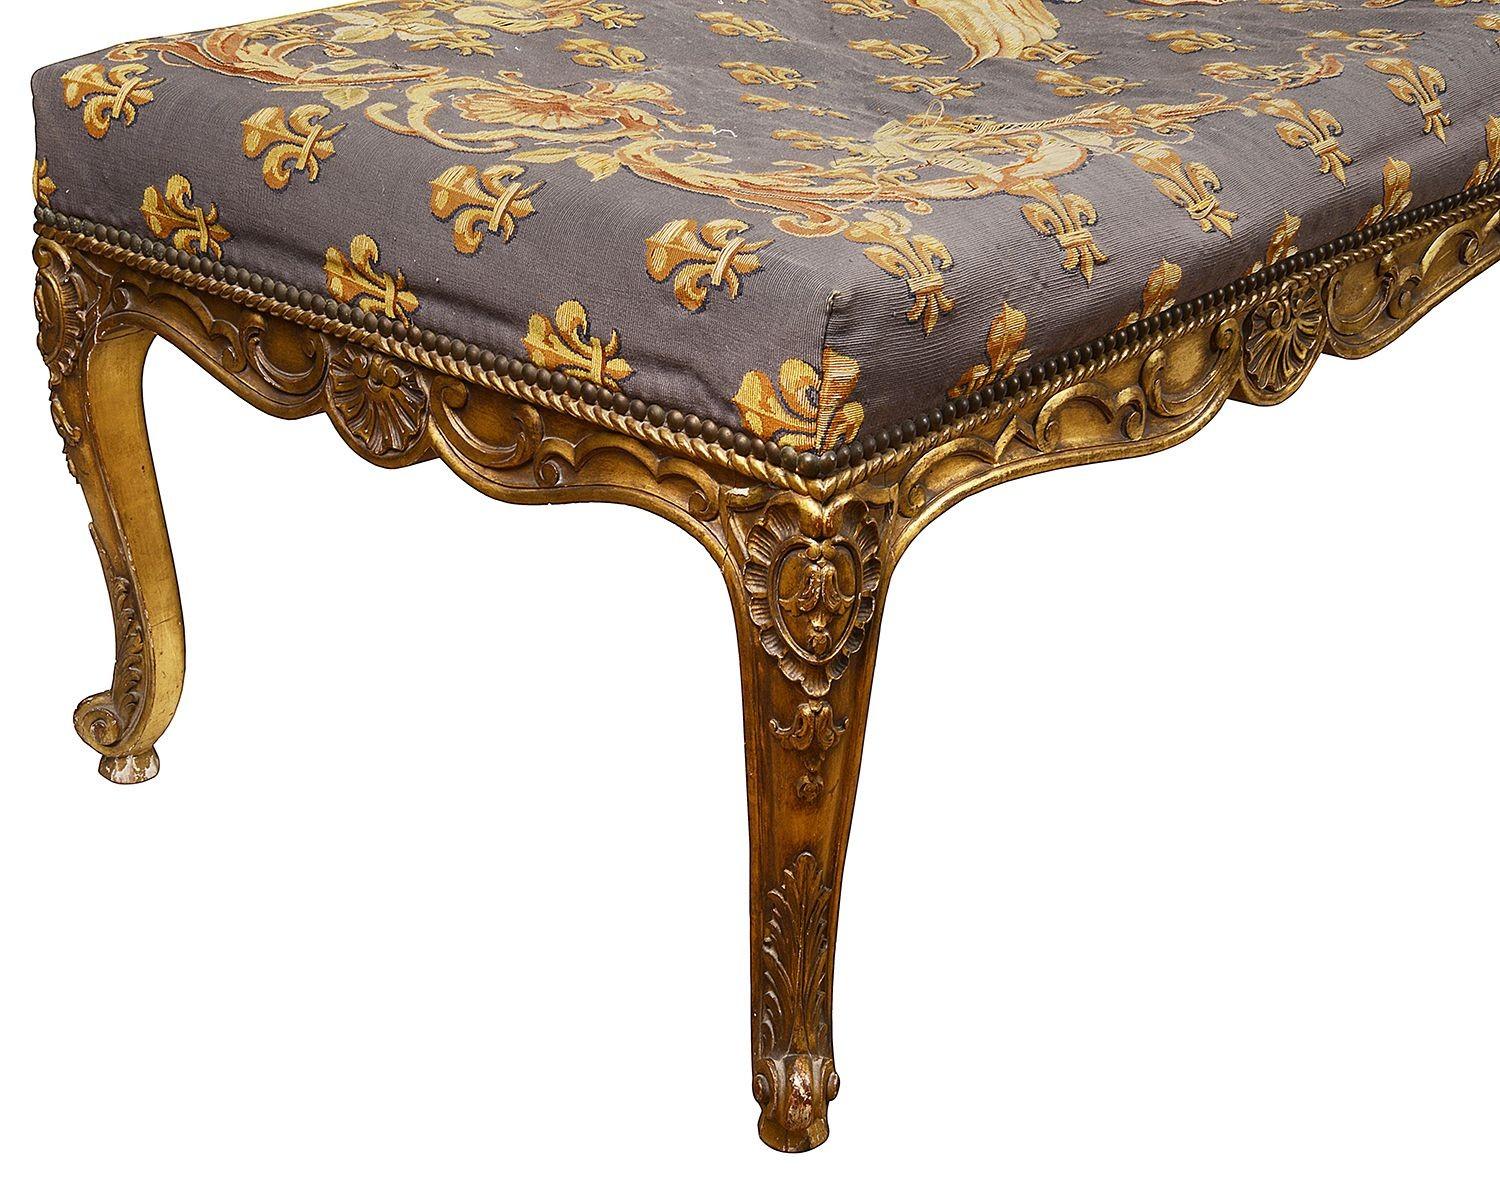 A very good quality late 19th Century Carved gilt wood Cabriole leg stool, with classical tapestry fabric.